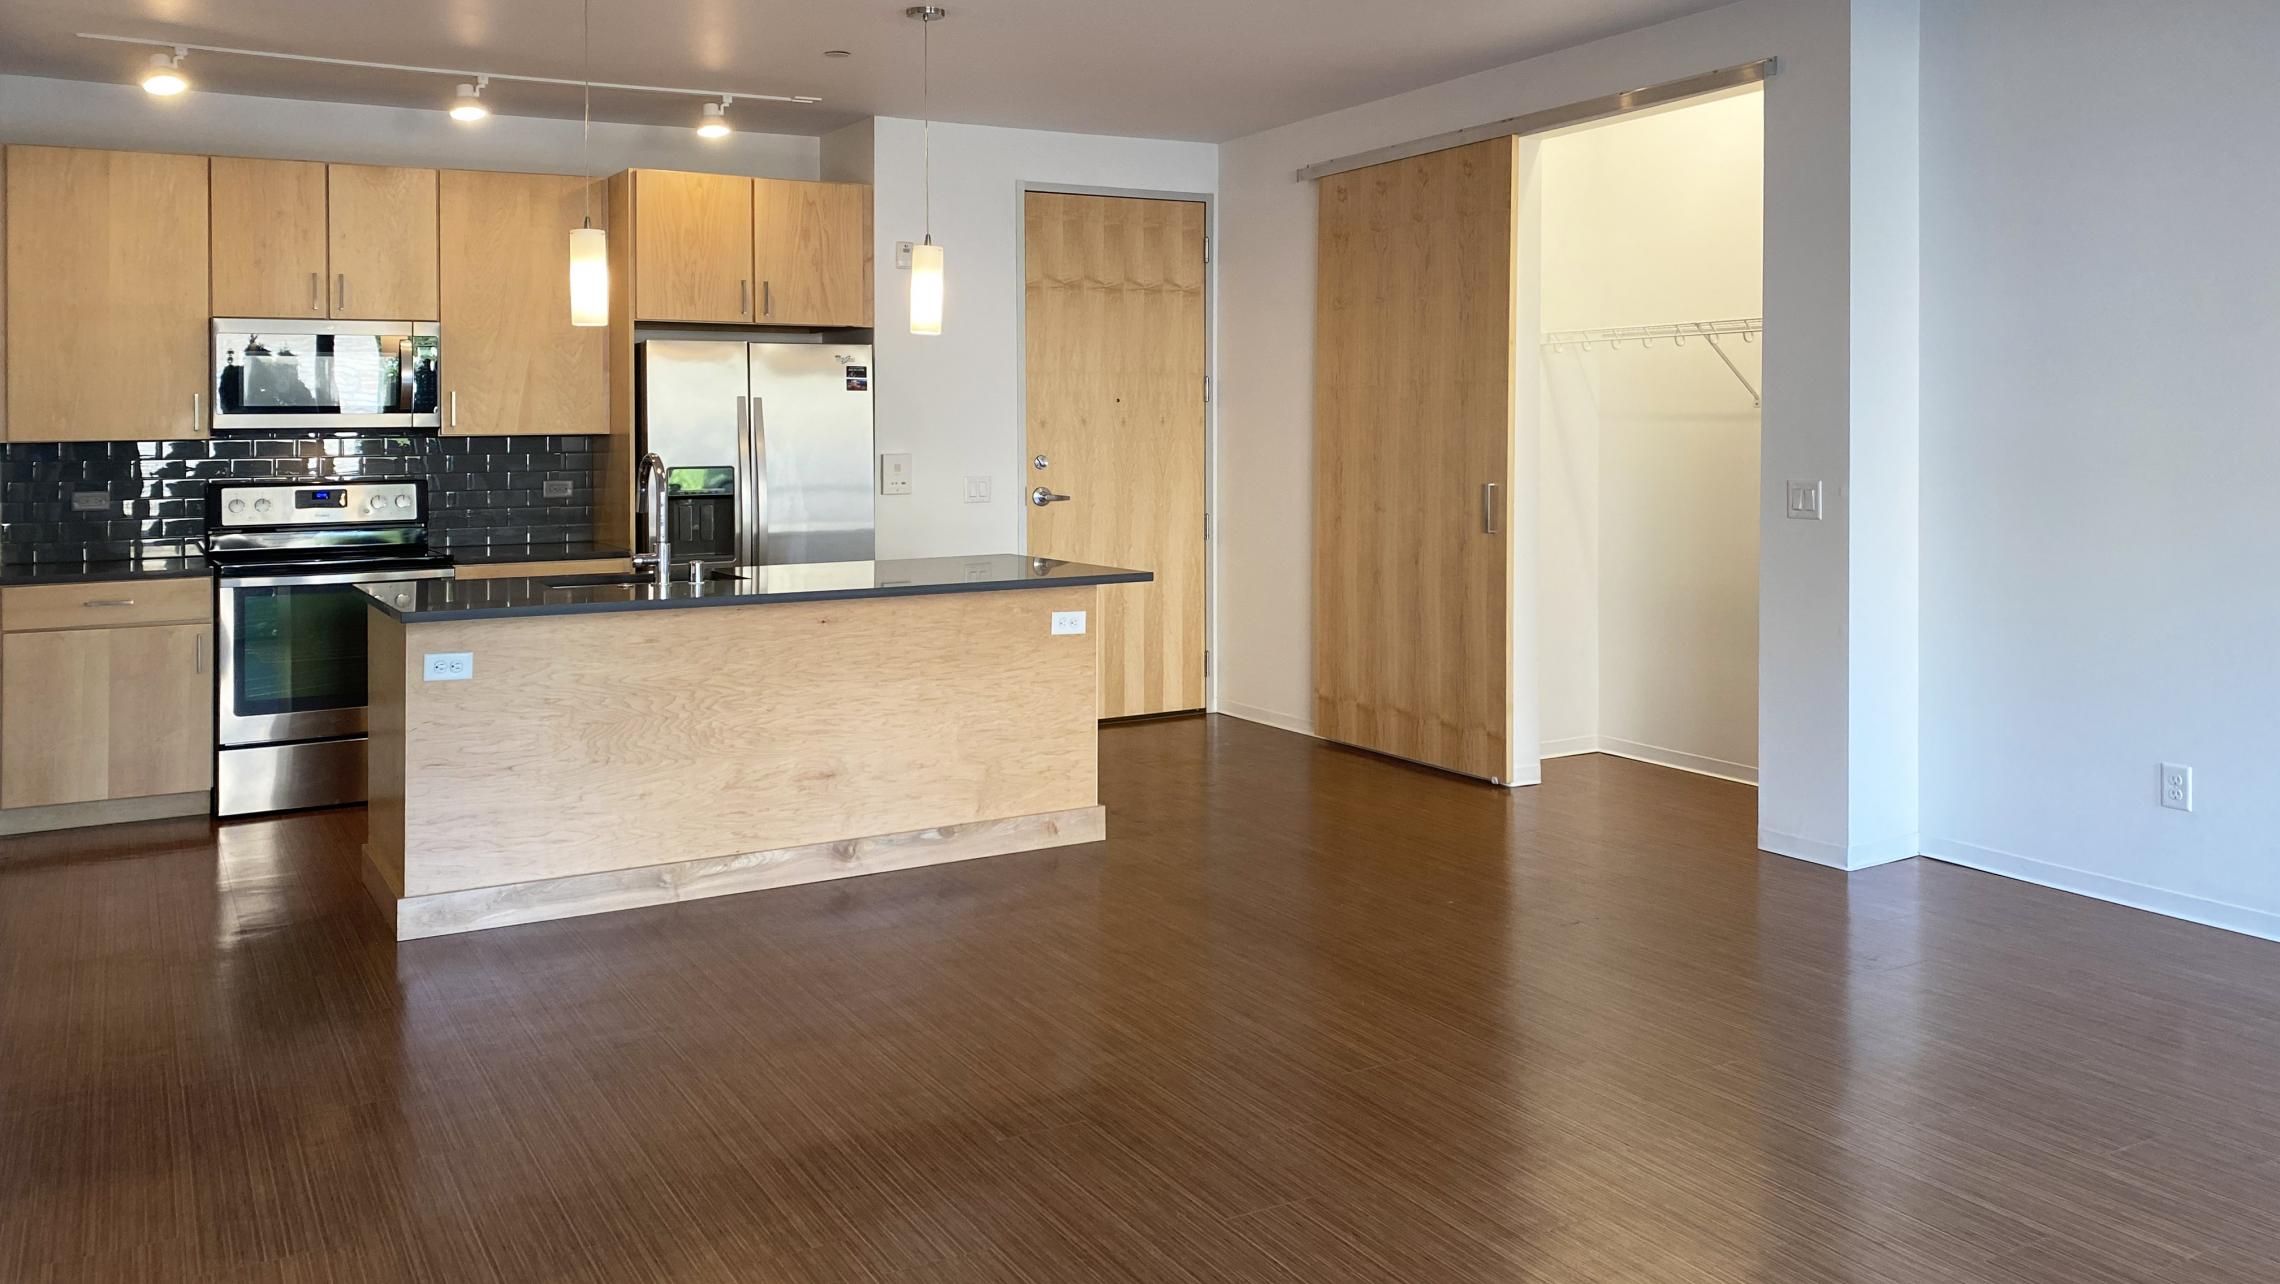 SEVEN27-at-The-Yards-Apartment-116-One-Bedroom-Modern-Upscale-Luxury-Design-Radiant-Heating-Fitness-Lounge-Fireplace-Courtyard-Downtown-Madison-Cats-Dogs-Lifestyle-Natural-Light